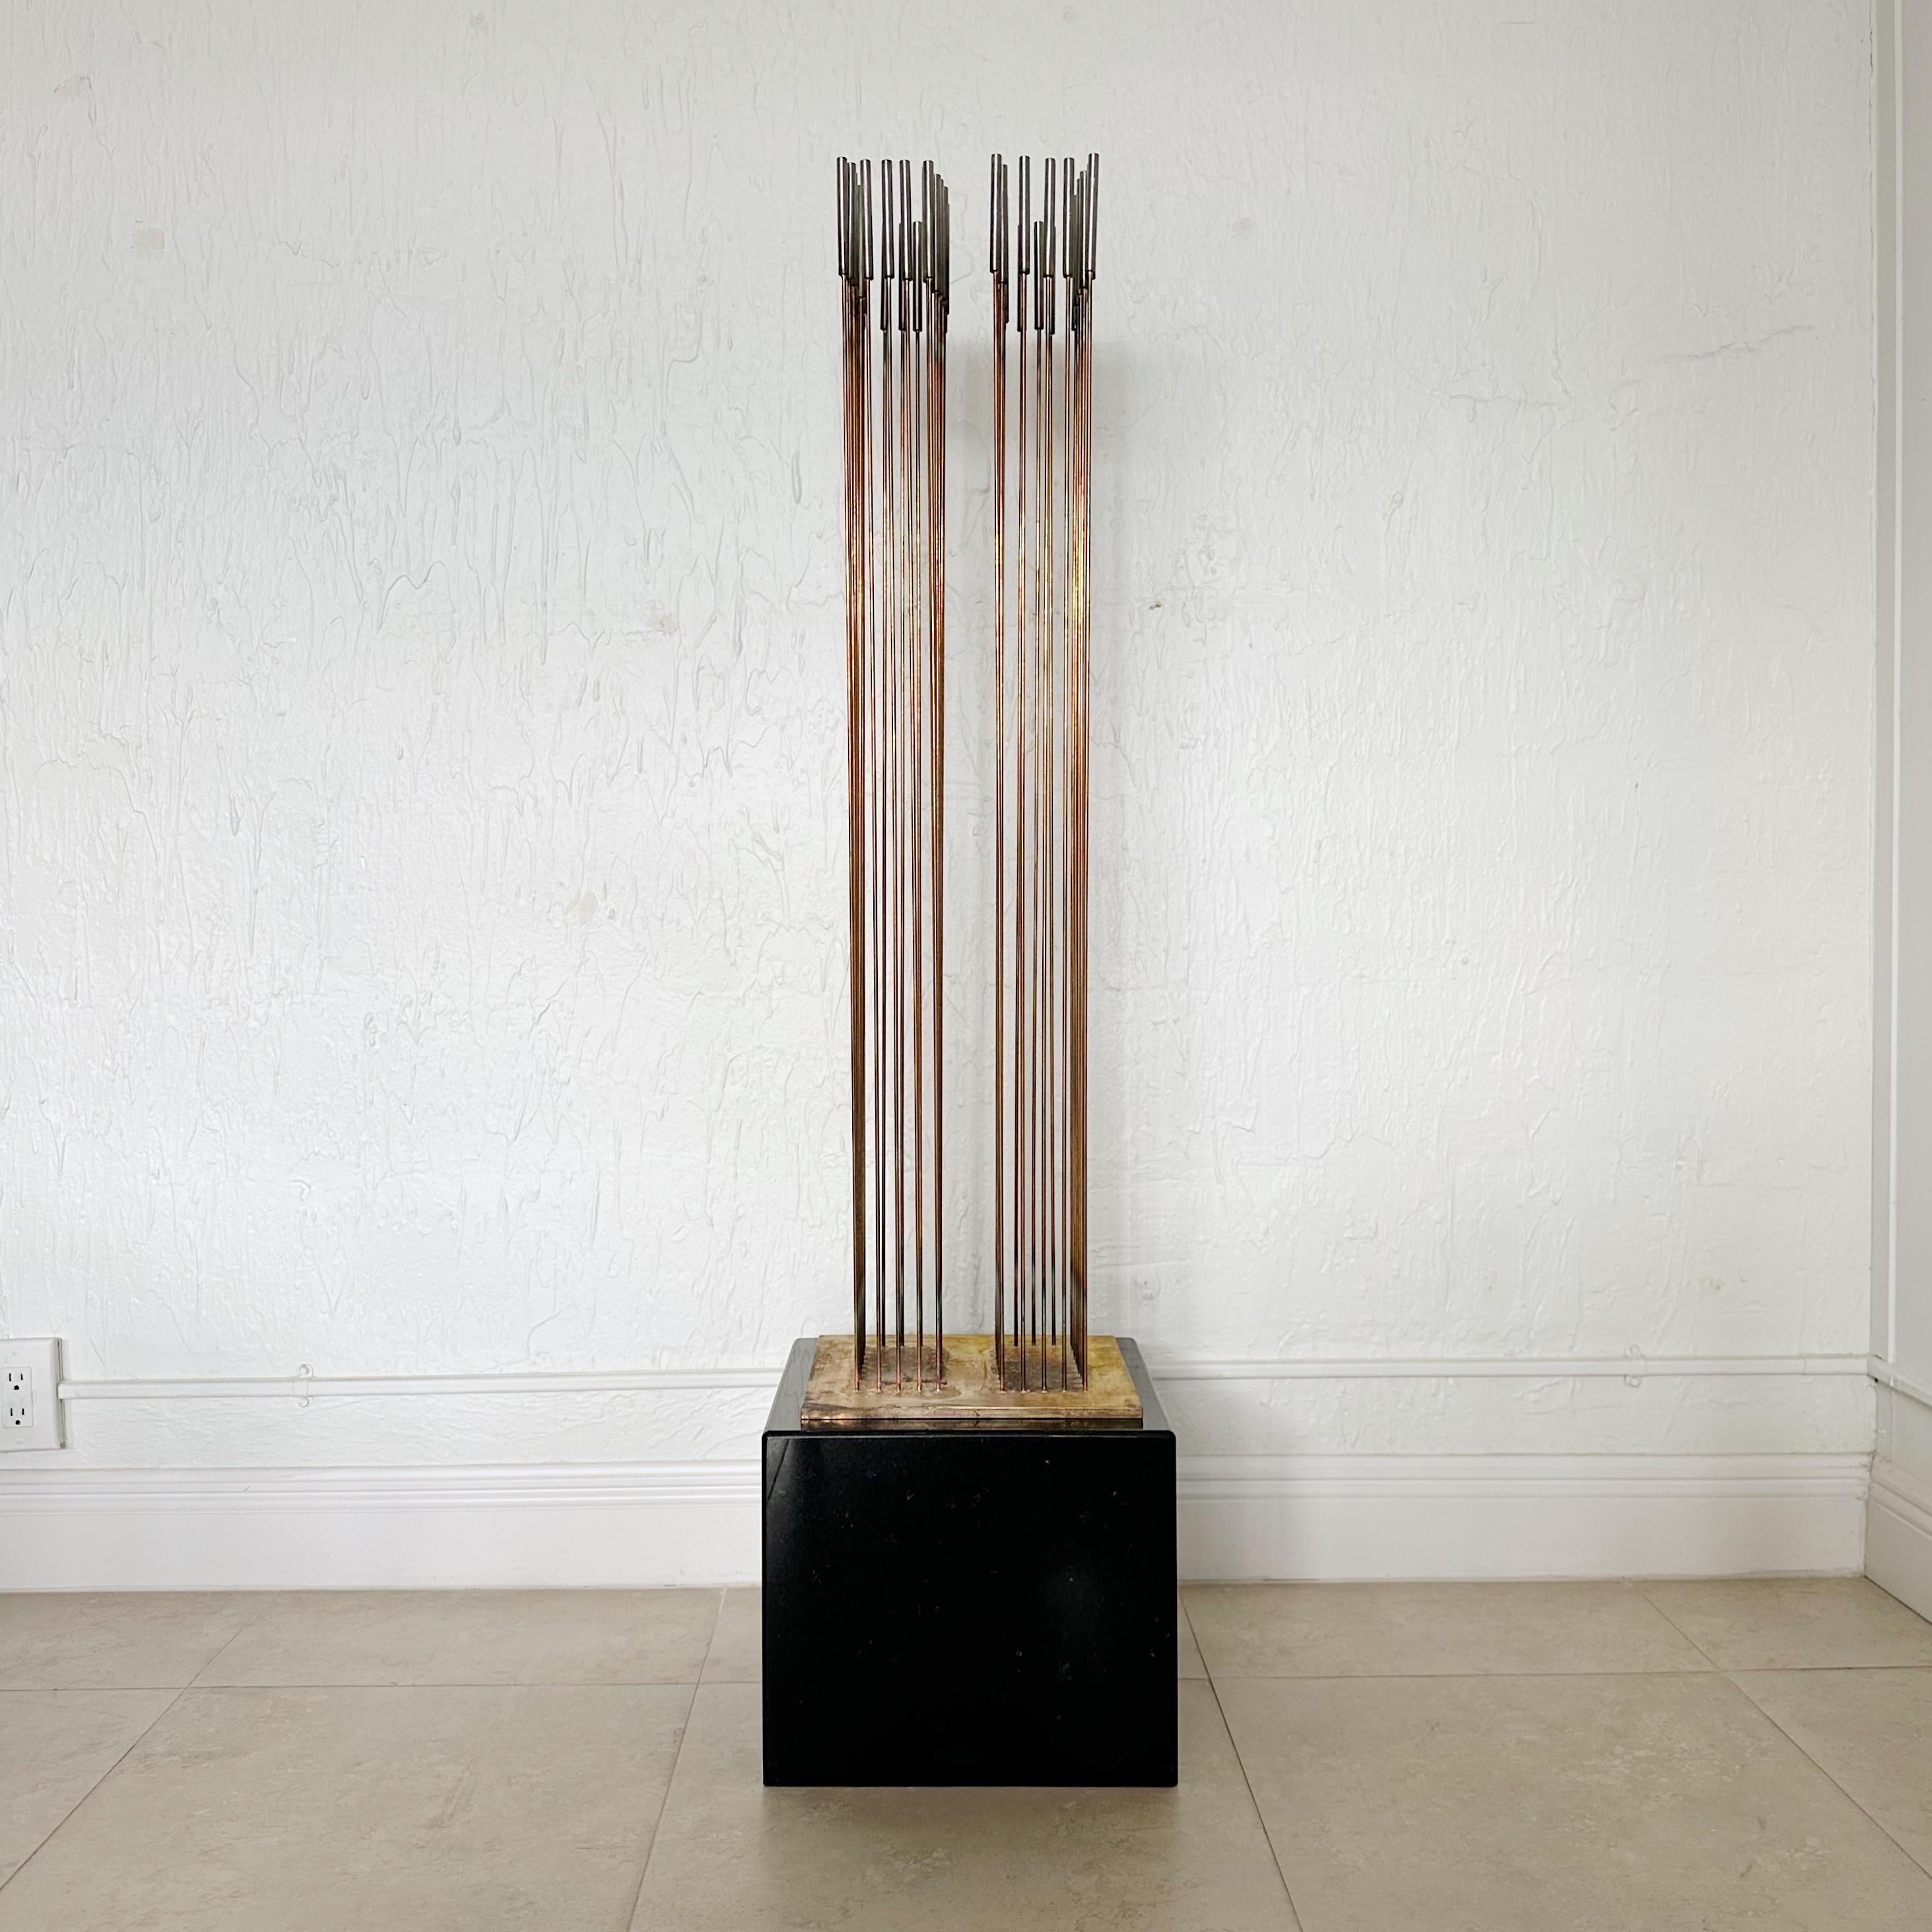 Sounding sculpture by Val Bertoia, American (born 1949). Titled 2 alphabets per year of sound. Comprised of 26 + 26 